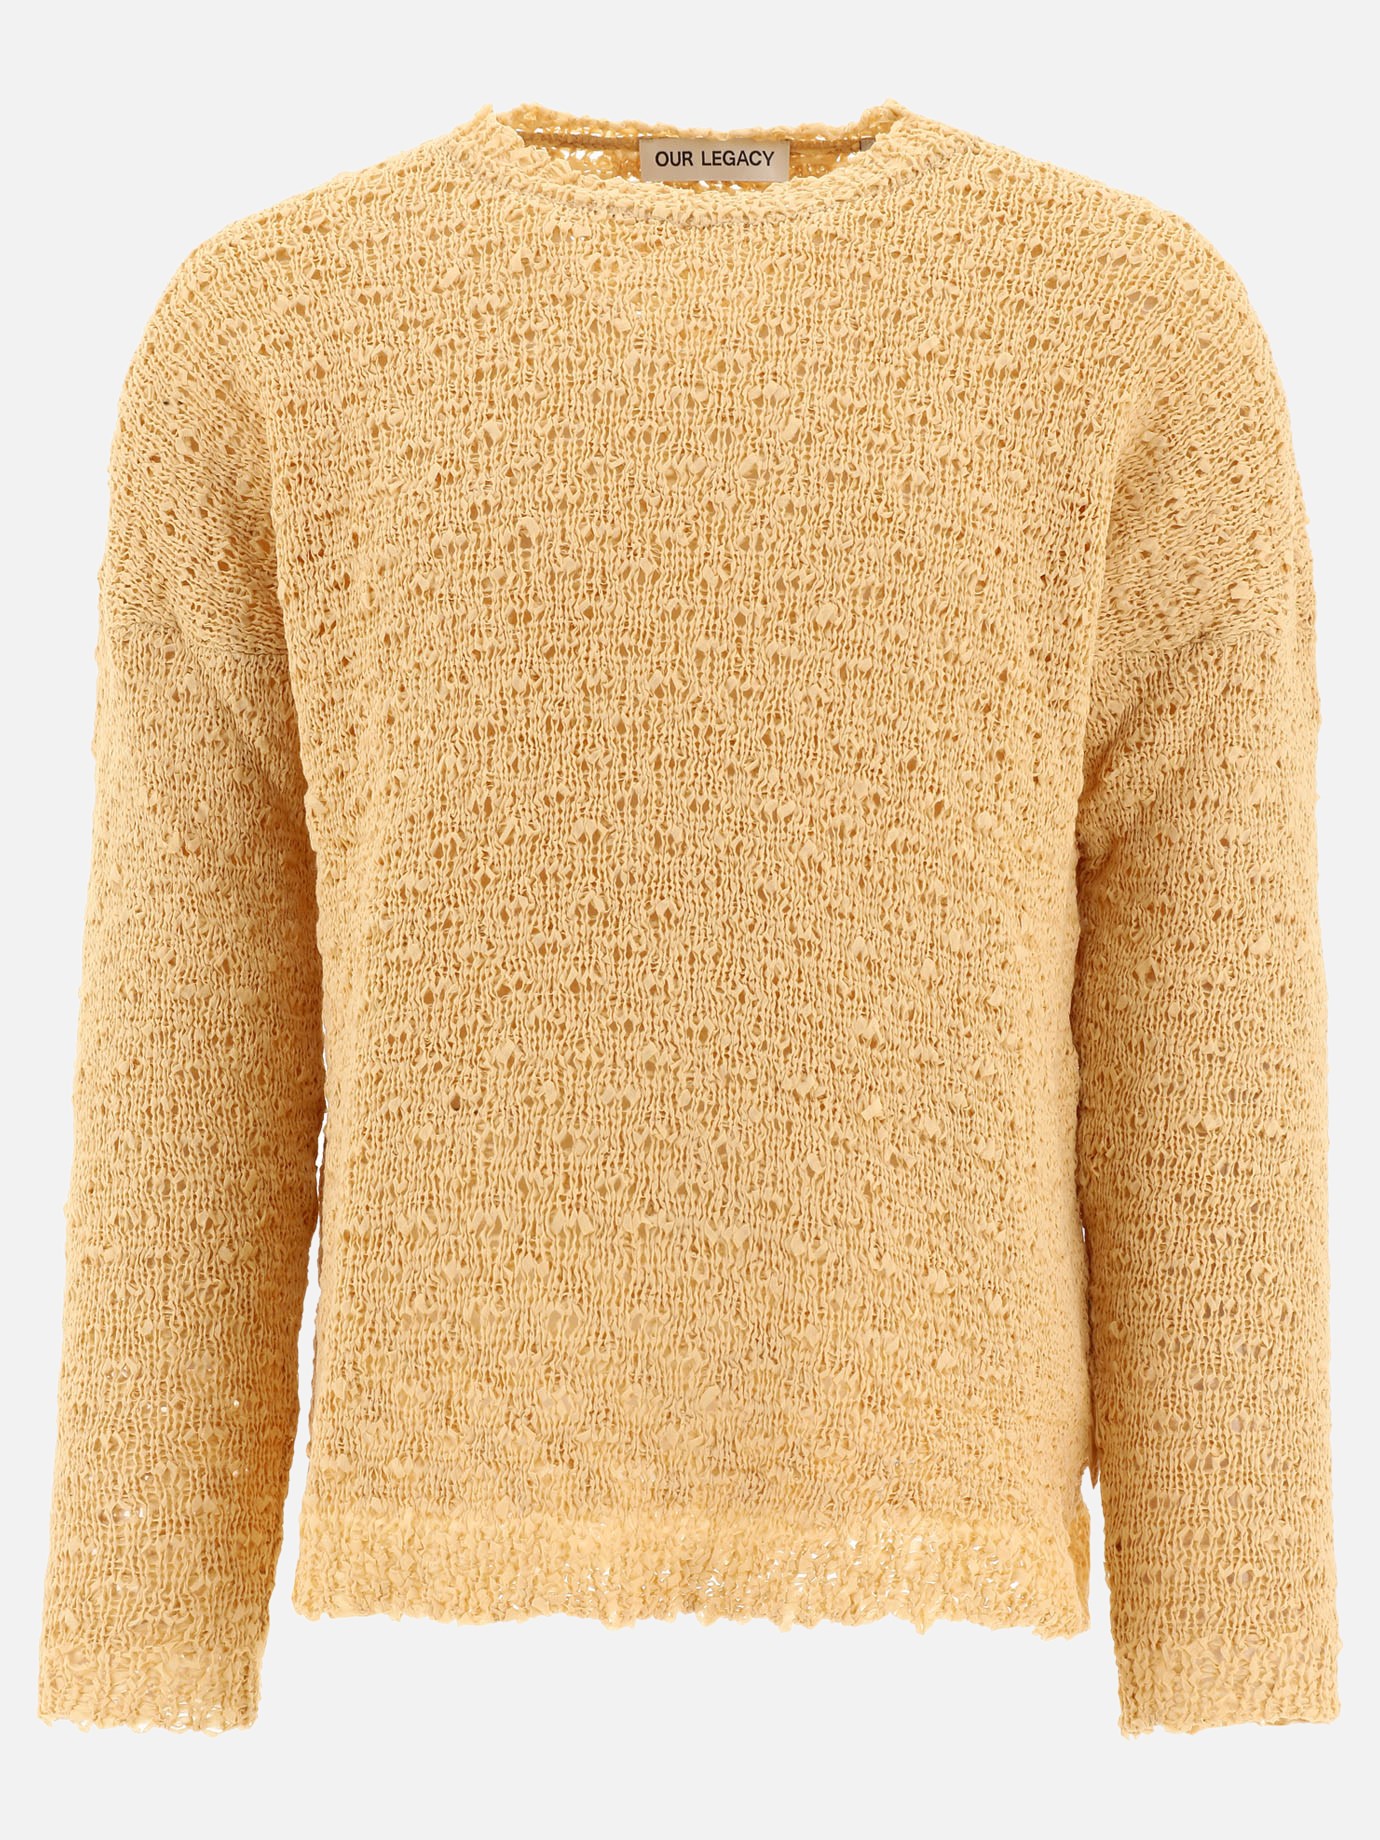  Popover  sweaterby Our Legacy - 3